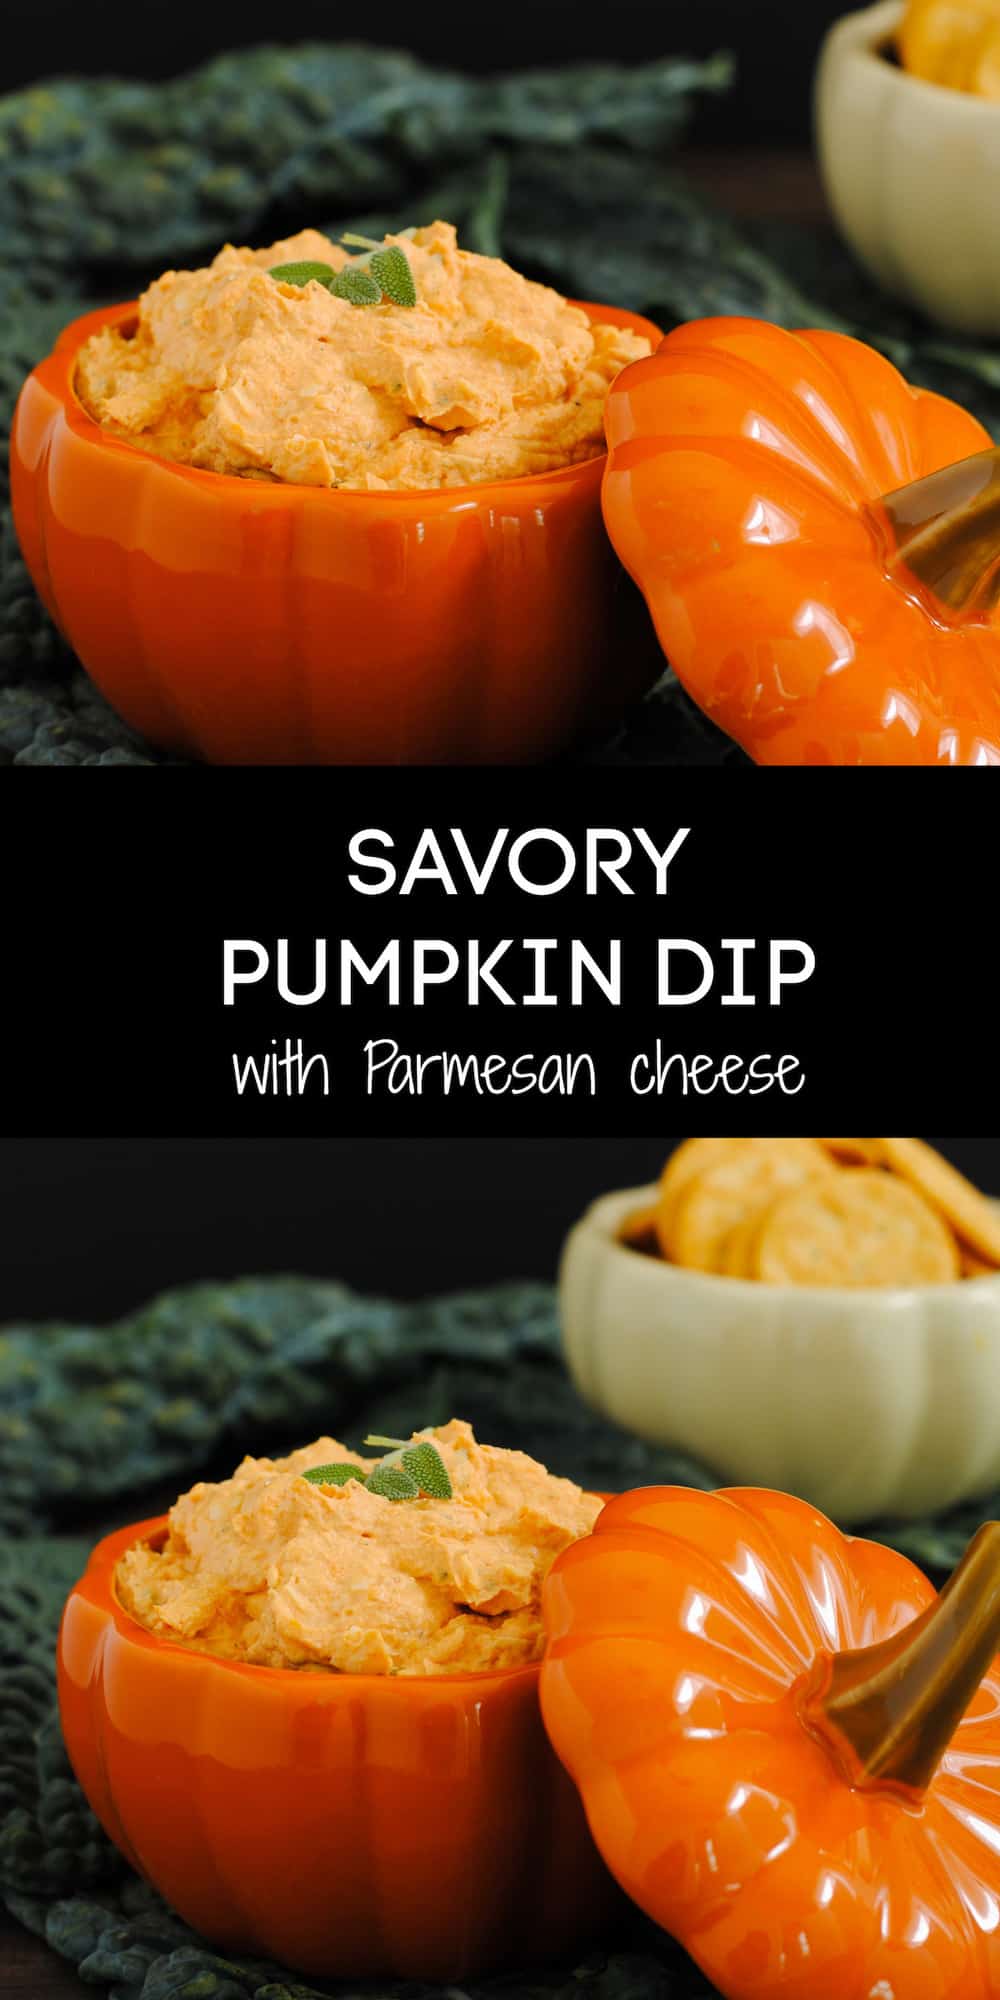 Collage of images of light orange dip served in a small ceramic pumpkin with overlay: SAVORY PUMPKIN DIP with Parmesan cheese.